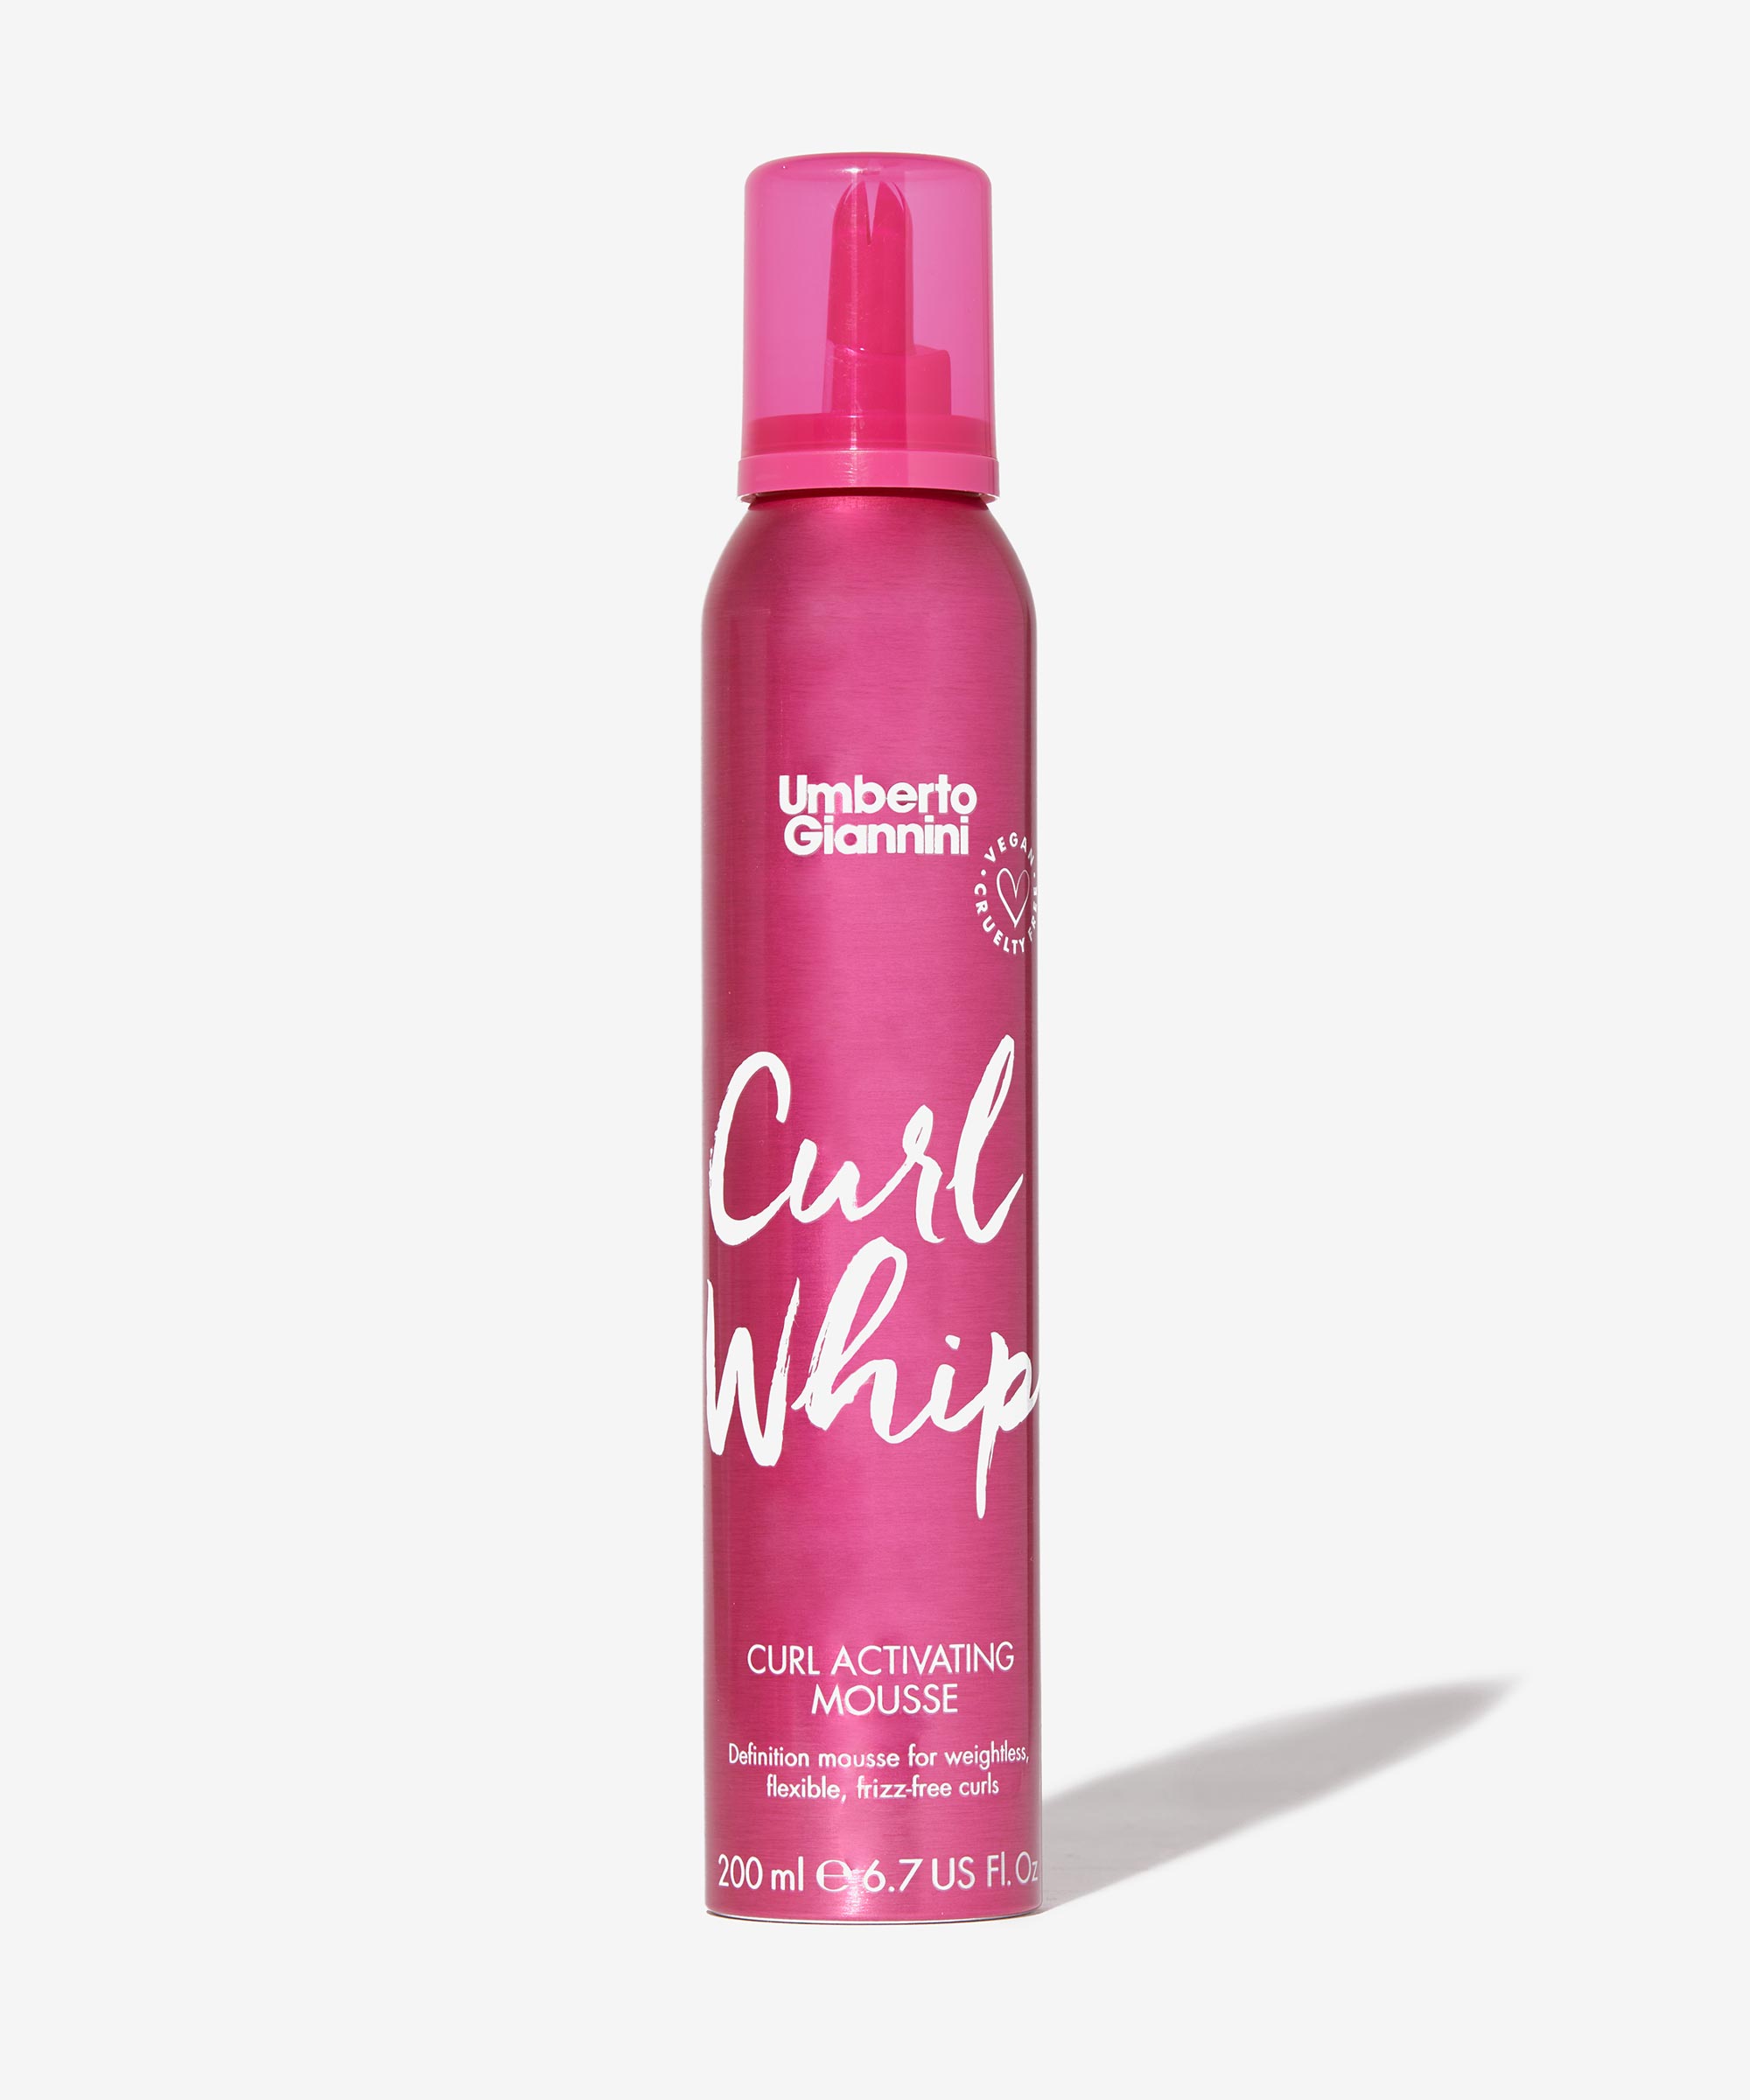 Extra definition. Umberto Giannini Curl Jelly.